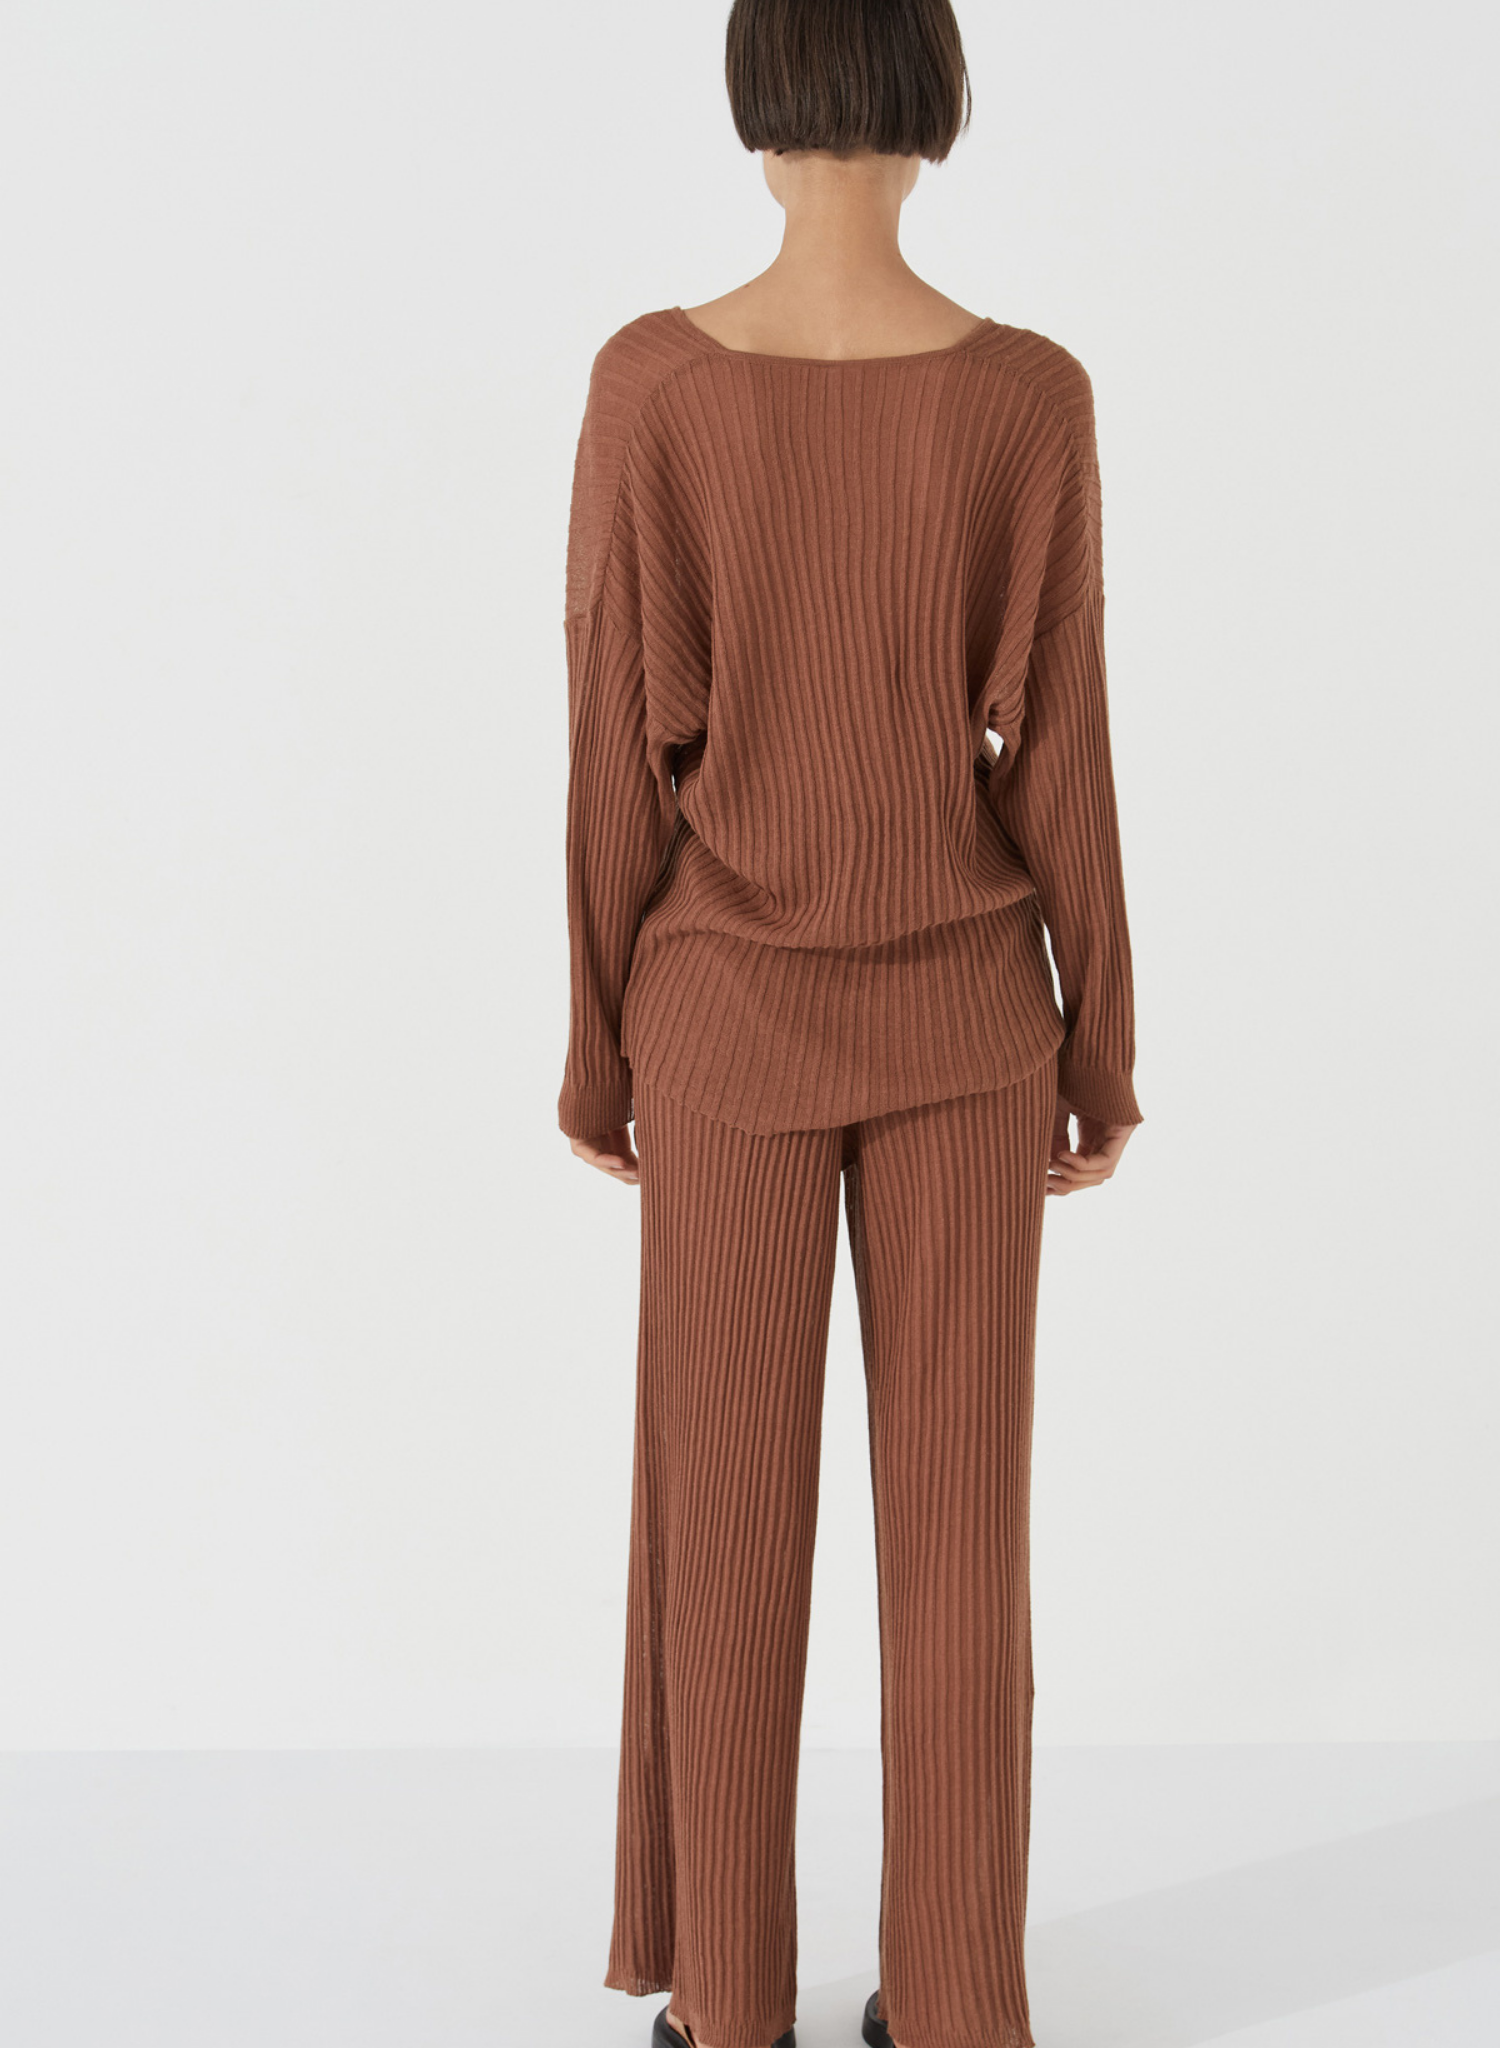 The Ribbed Knit Top by Zulu & Zephyr is a textured sheer fine knit, featuring a casual long sleeve with drop shoulder, and feminine V neckline. Inspired by the drape of tactile cloth and soft organic forms, this transeasonal essential may be paired with the coordinating Ribbed Knit Pants.